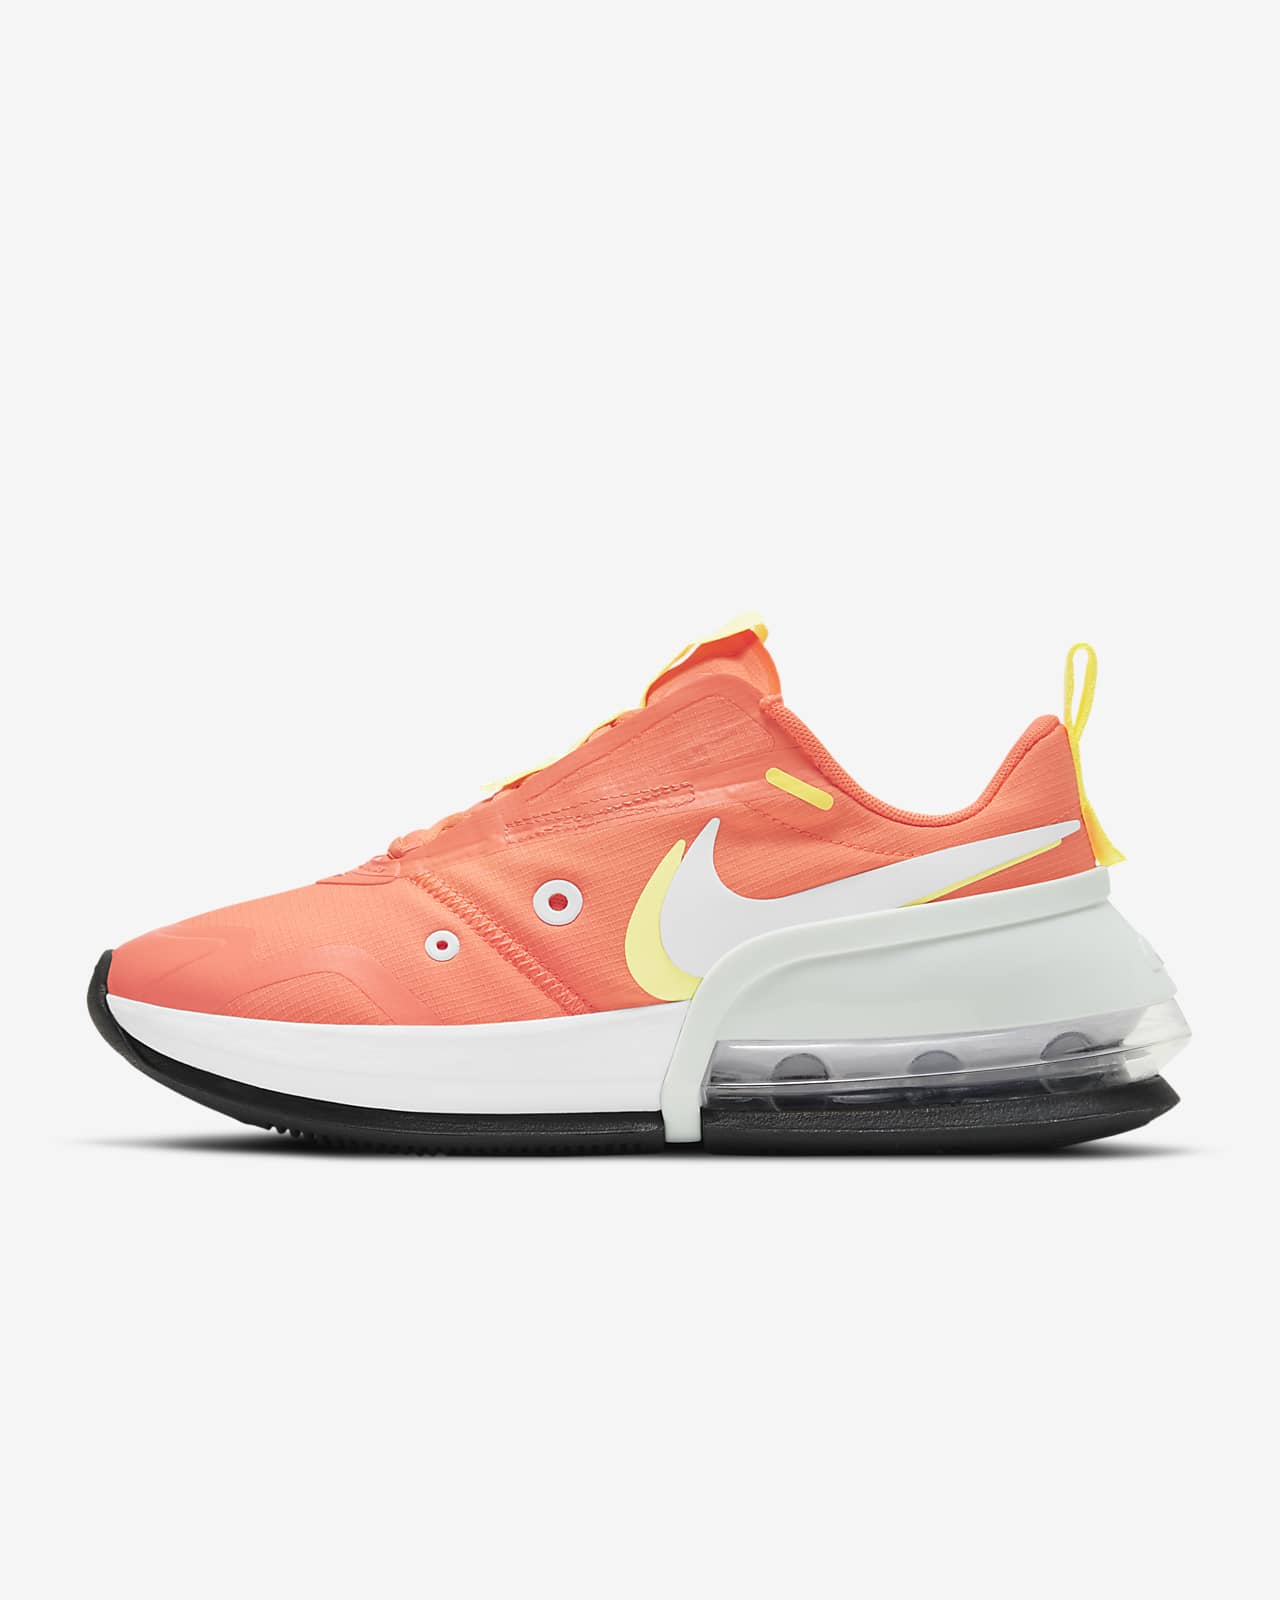 Women's Nike Air Max Up 'Bright Mango' $69.97 Free Shipping - Sneaker Steal